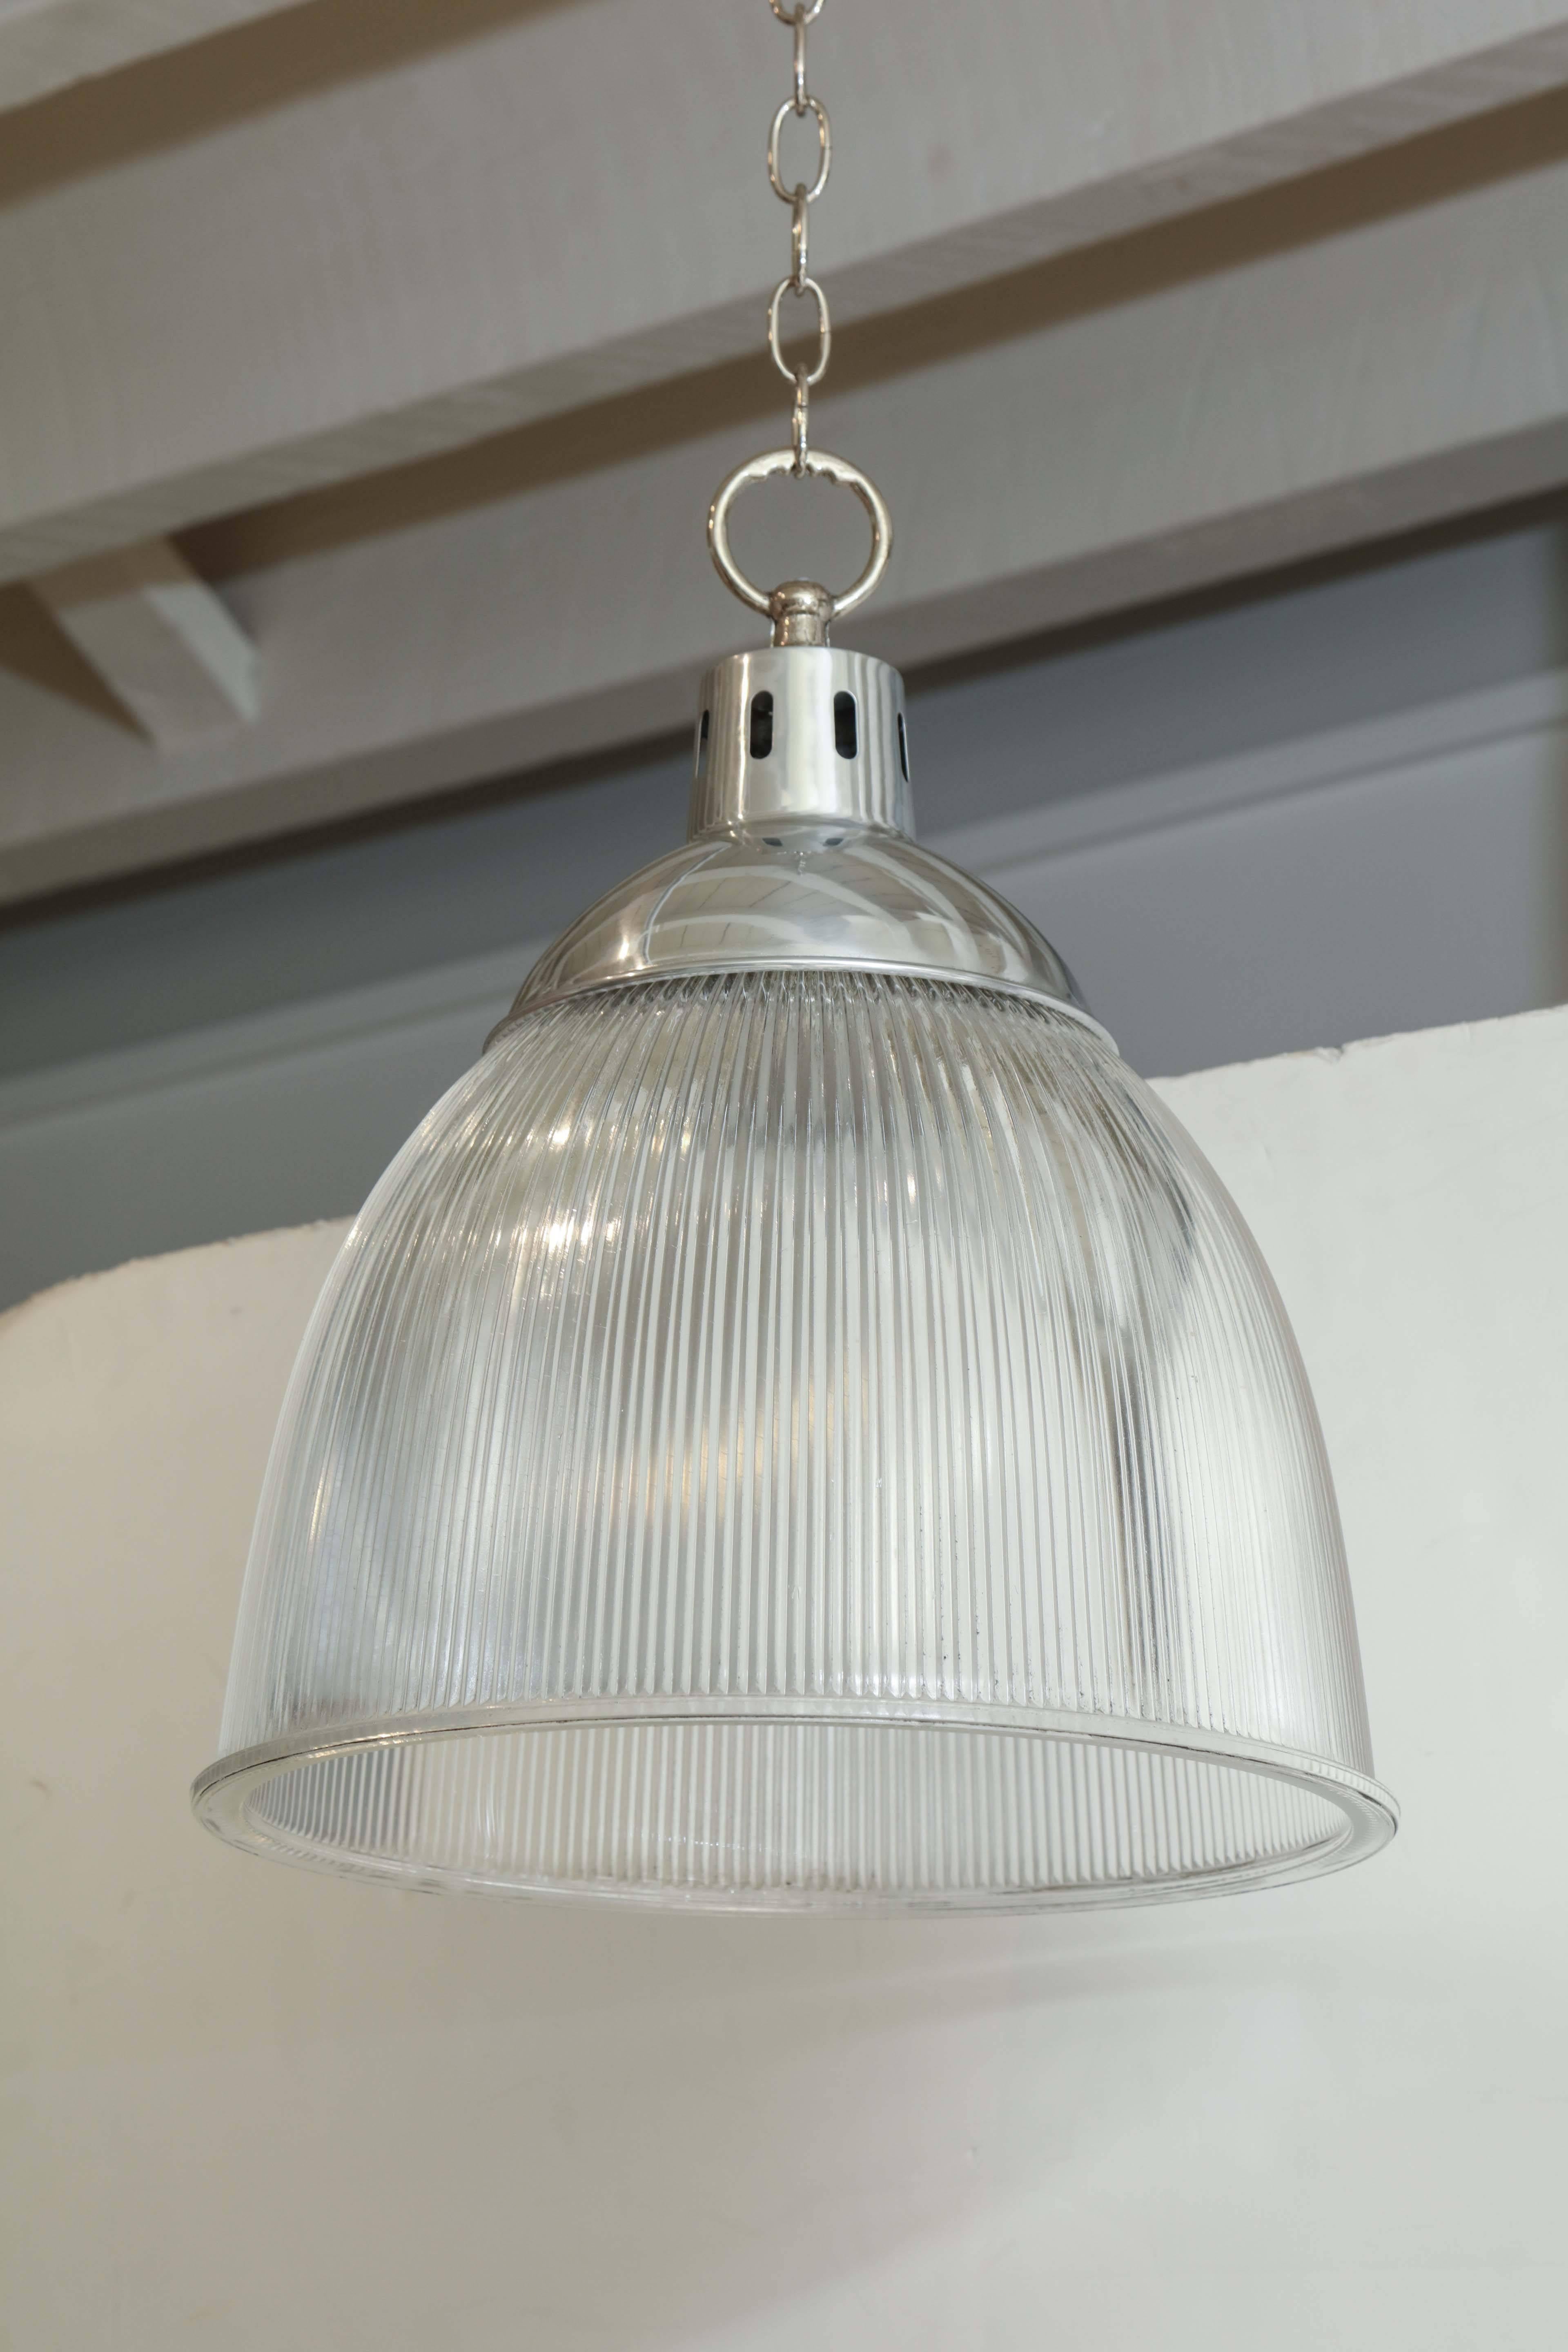 Pair of Halophane and aluminium pendant light fixtures. Recently rewired for US specifications.


Available to see in our NYC Showroom 
BK Antiques
306 East 61st St. 2nd fl.
New York, NY 10065